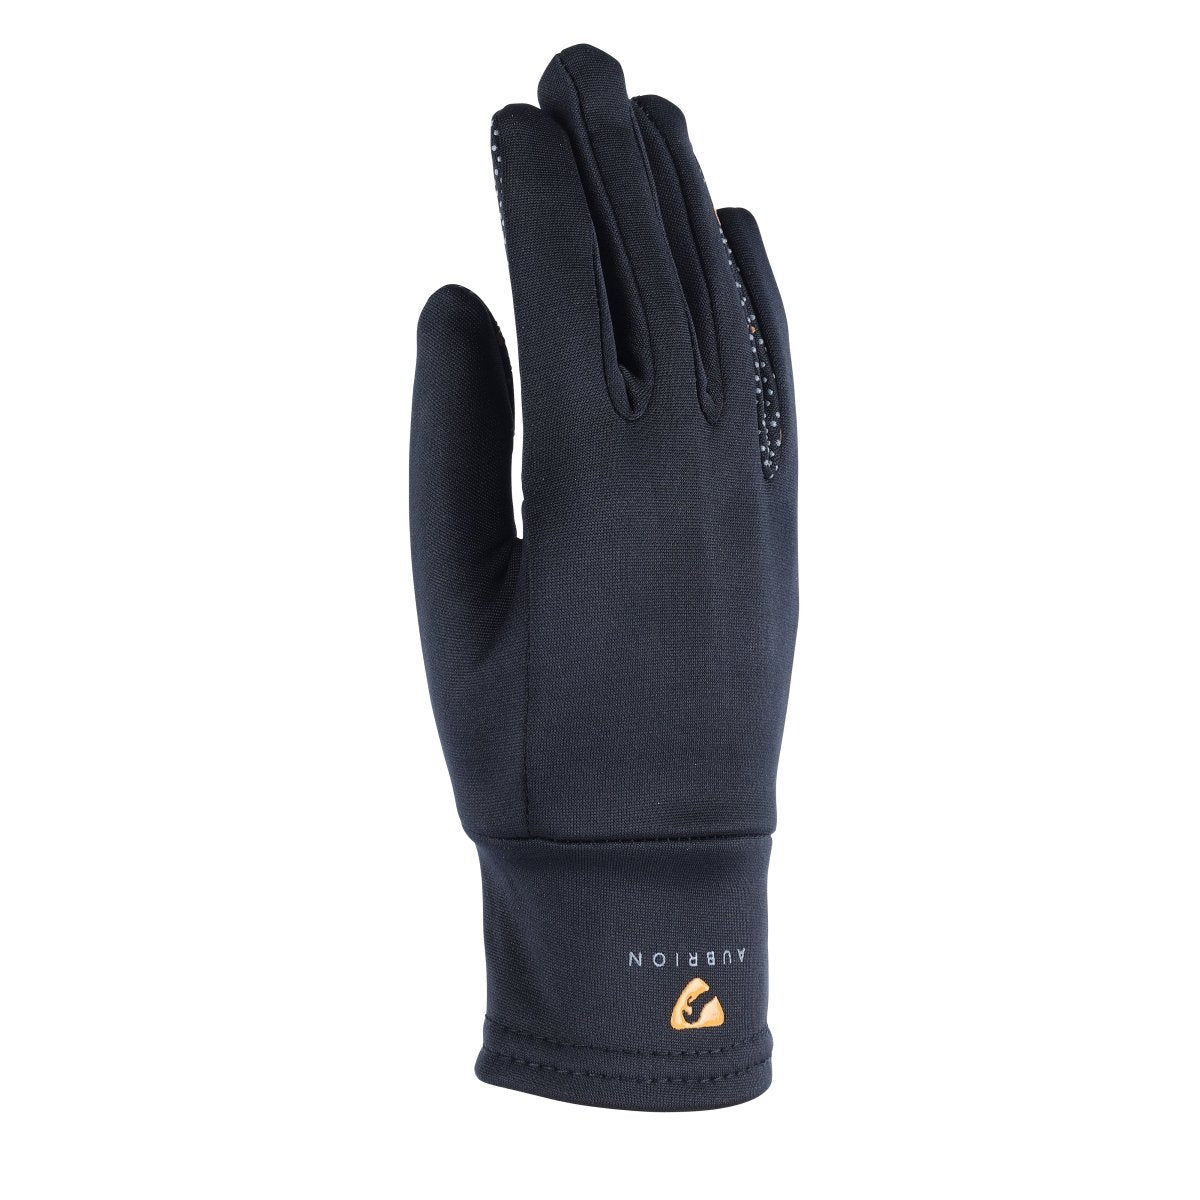 Aubrion Patterson Thermal Winter Riding Gloves - Black - XS